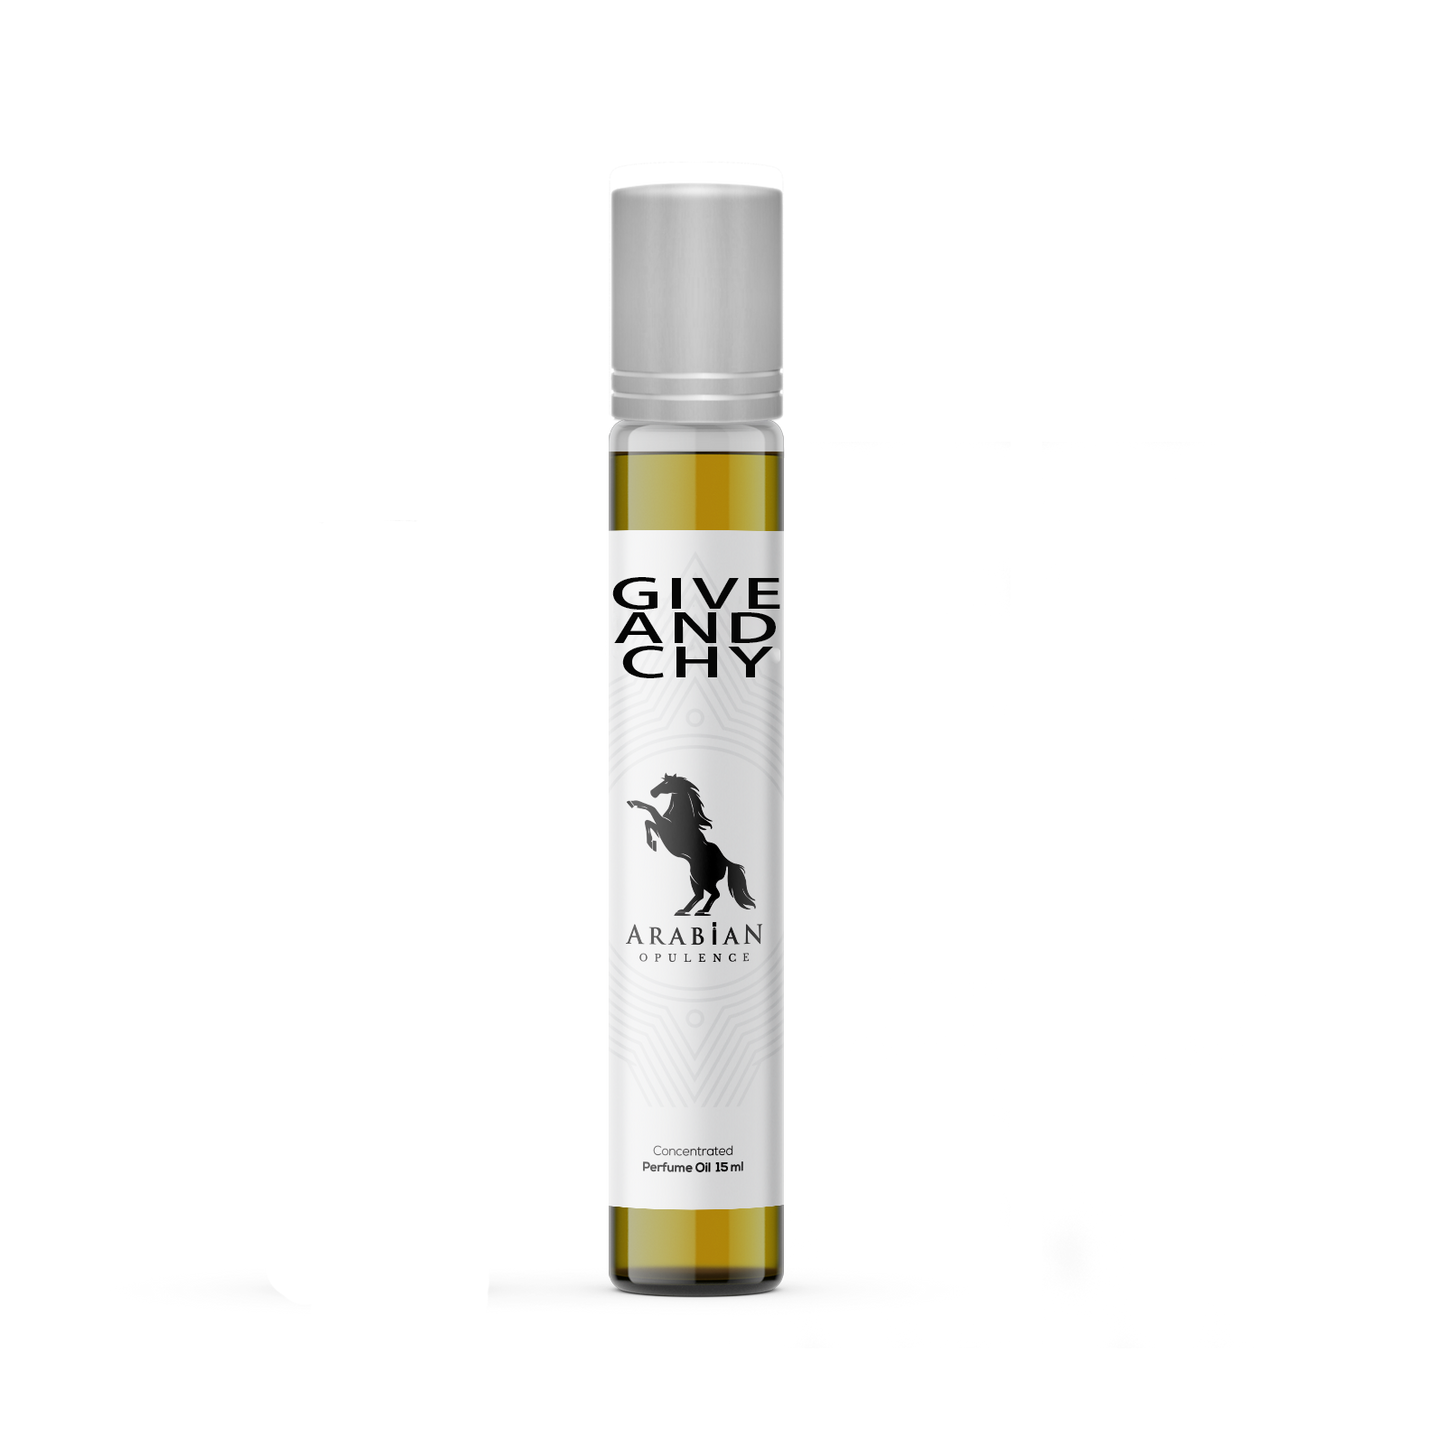 FR130 GIVE AND CHY FOR MEN - Perfume Body Oil - Alcohol Free